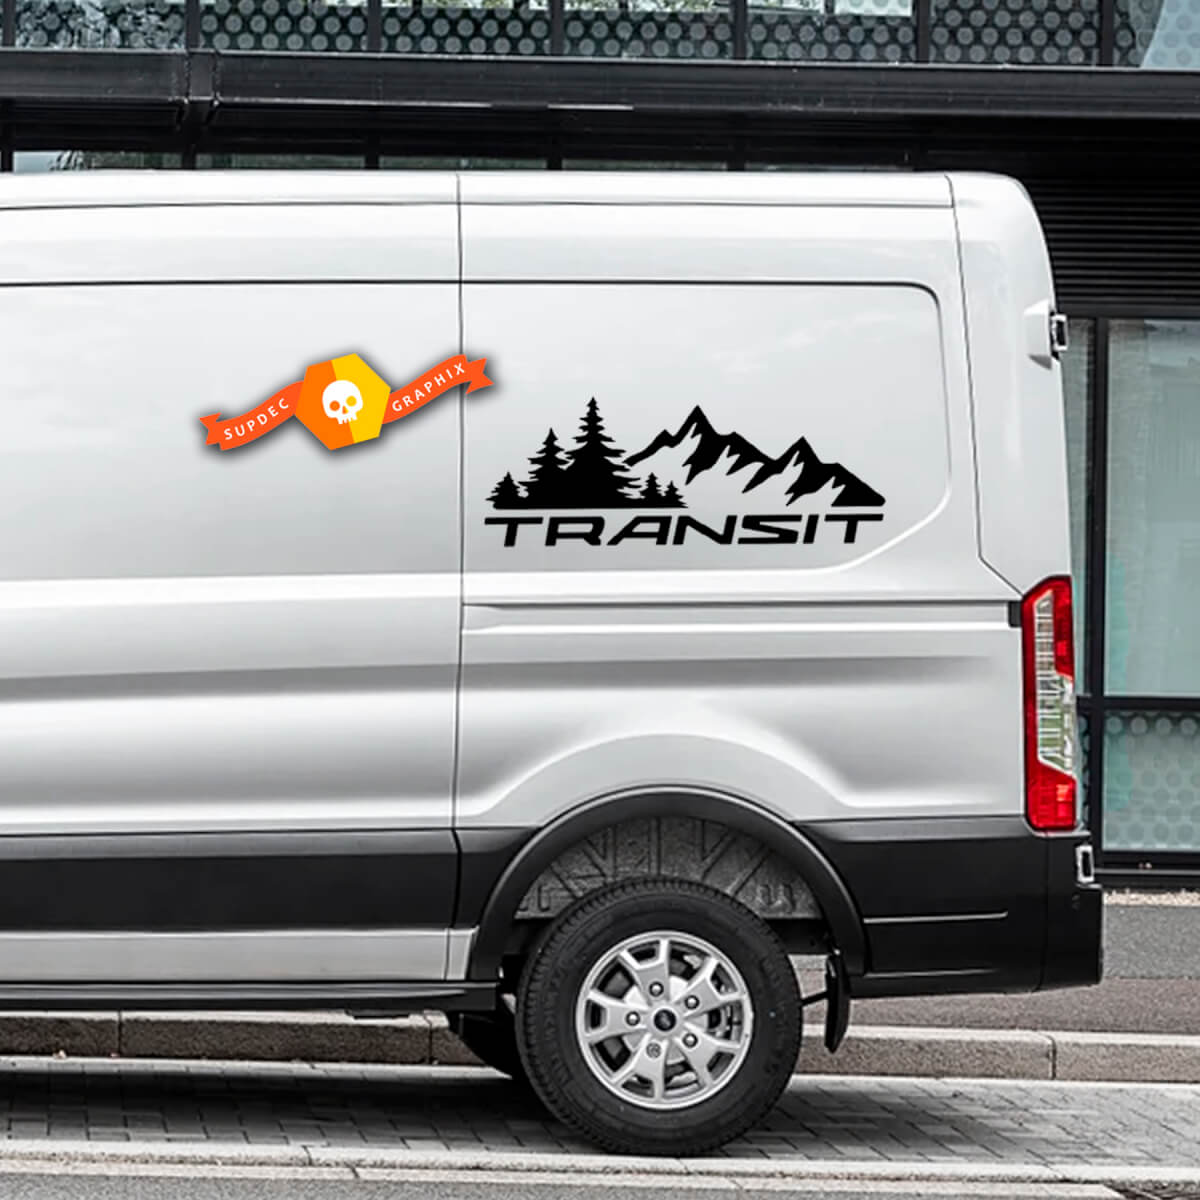 2023 FORD TRANSIT-TRAIL Mountain Forest Logo TRANSIT Vinyl Decals Any Size Fits to Nissan, Toyota, Chevy, GMC, Dodge, Ford
